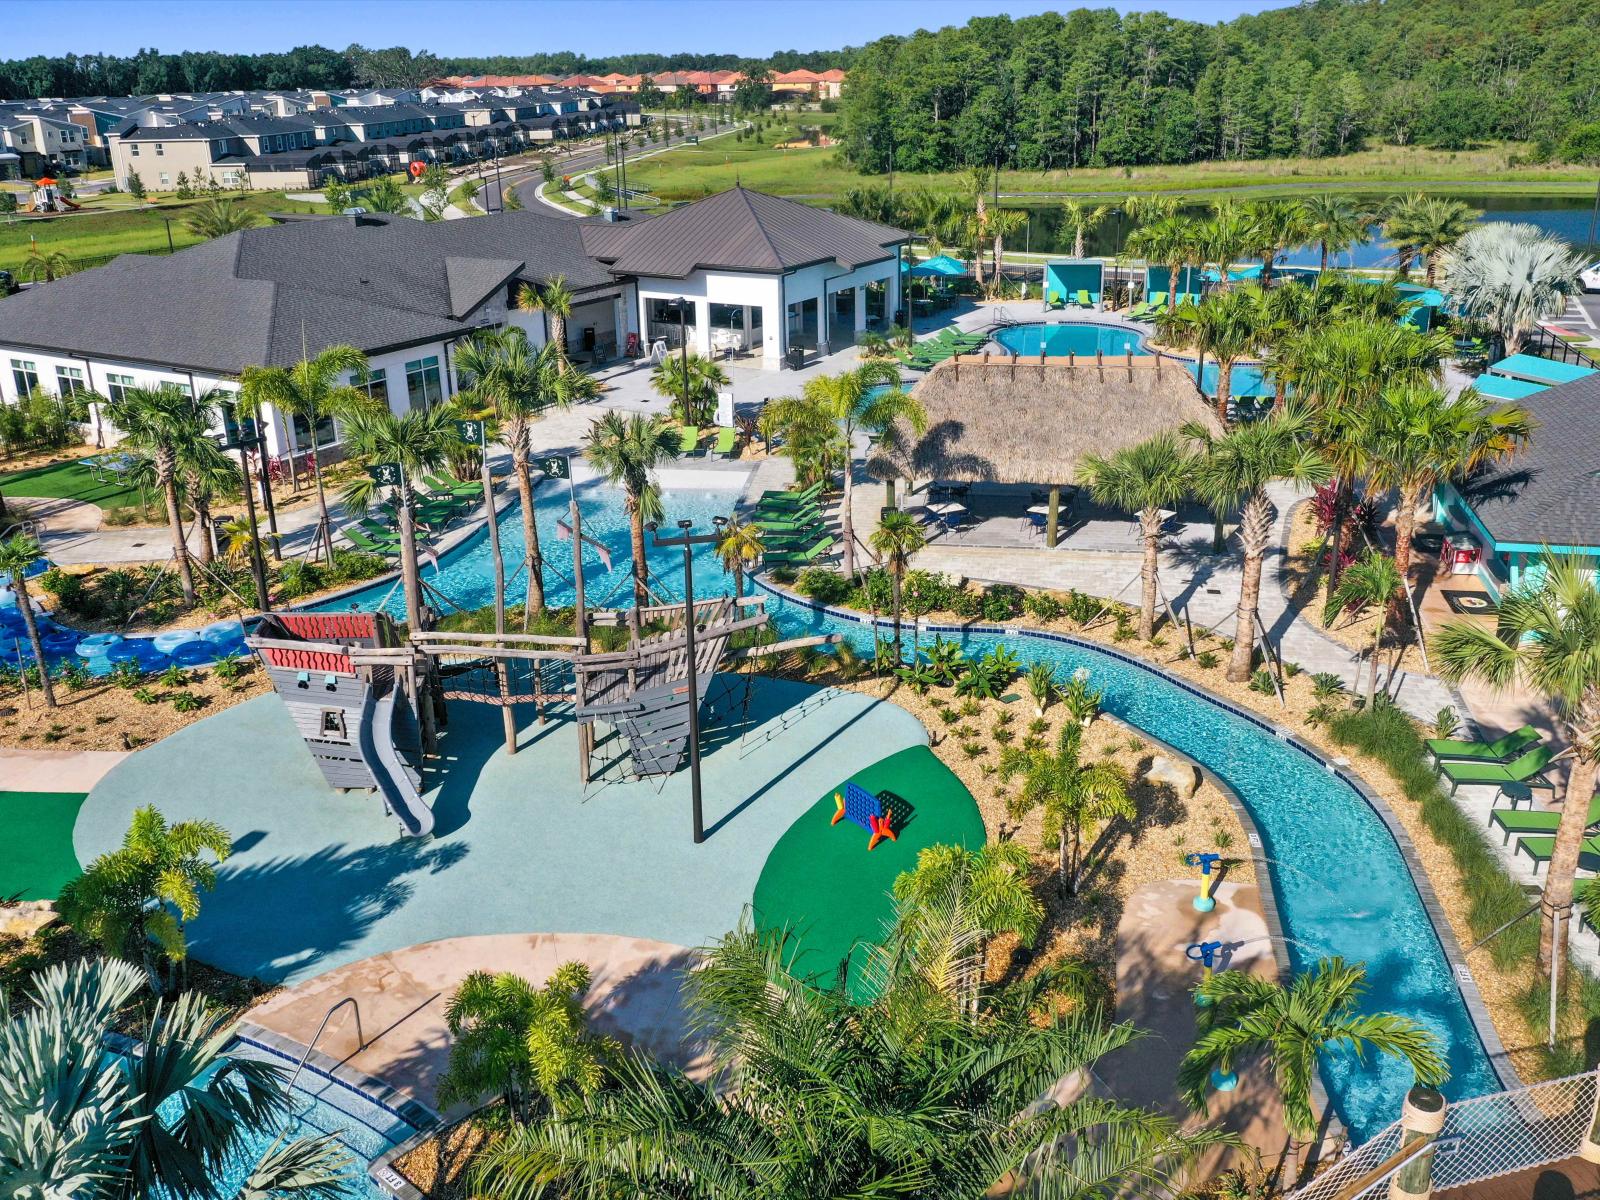 Water play feature and lazy river